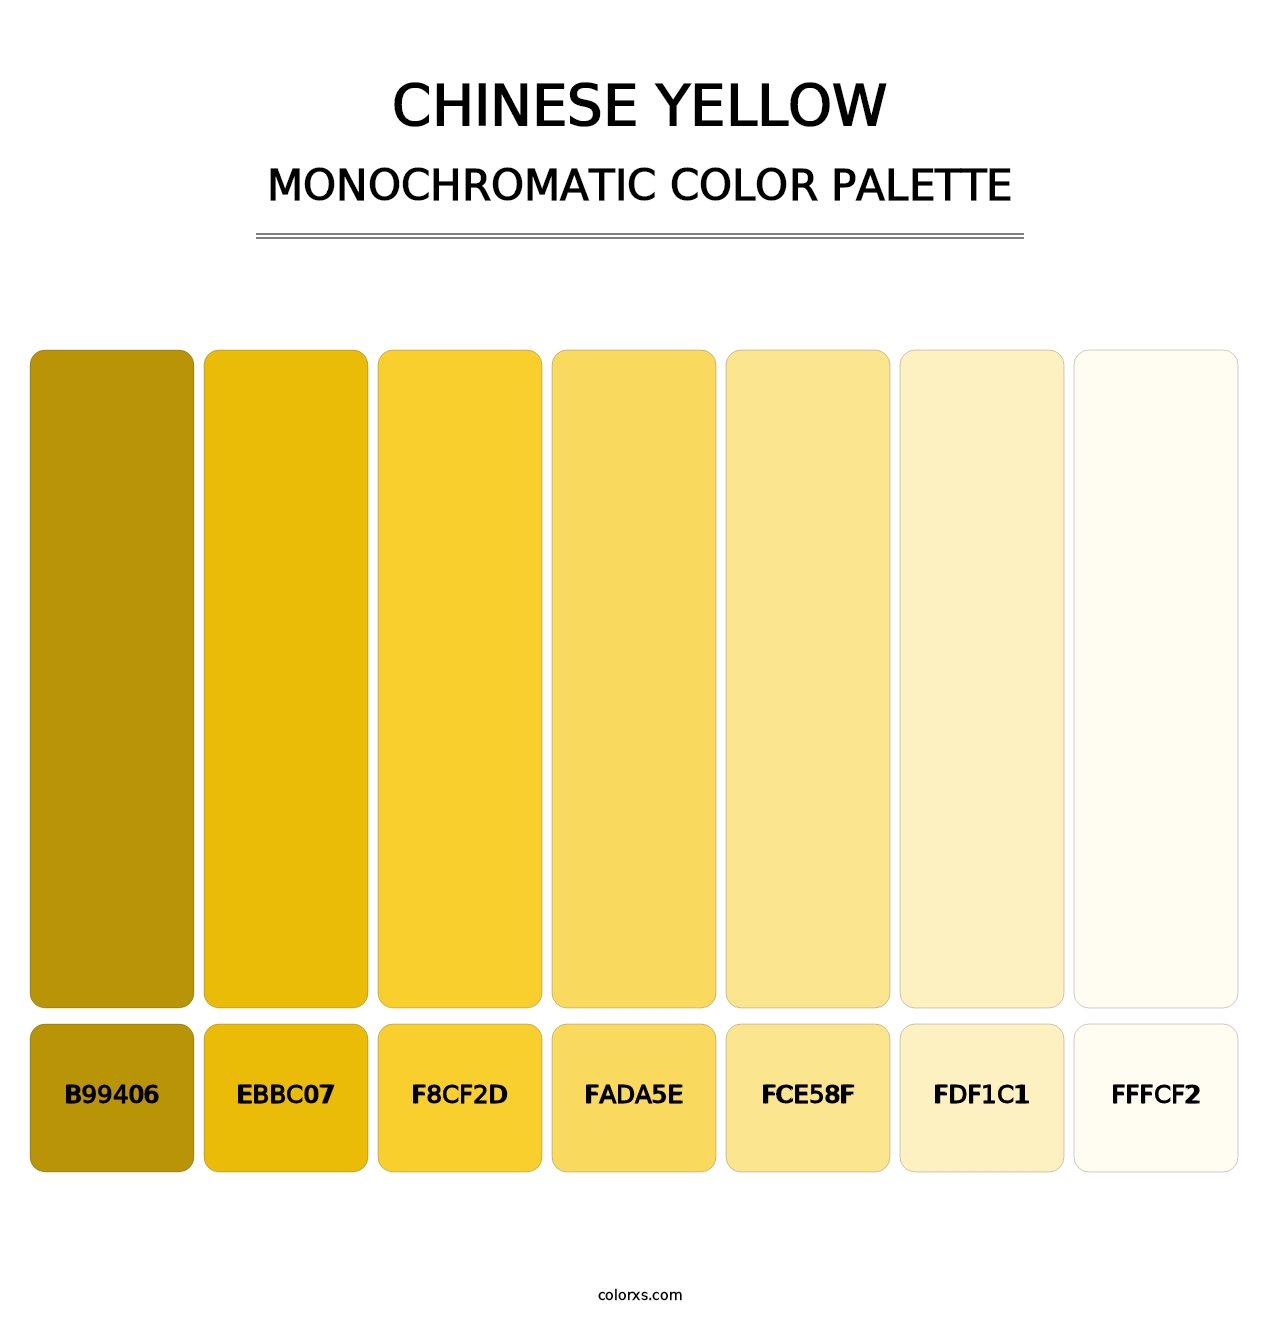 Chinese Yellow - Monochromatic Color Palette